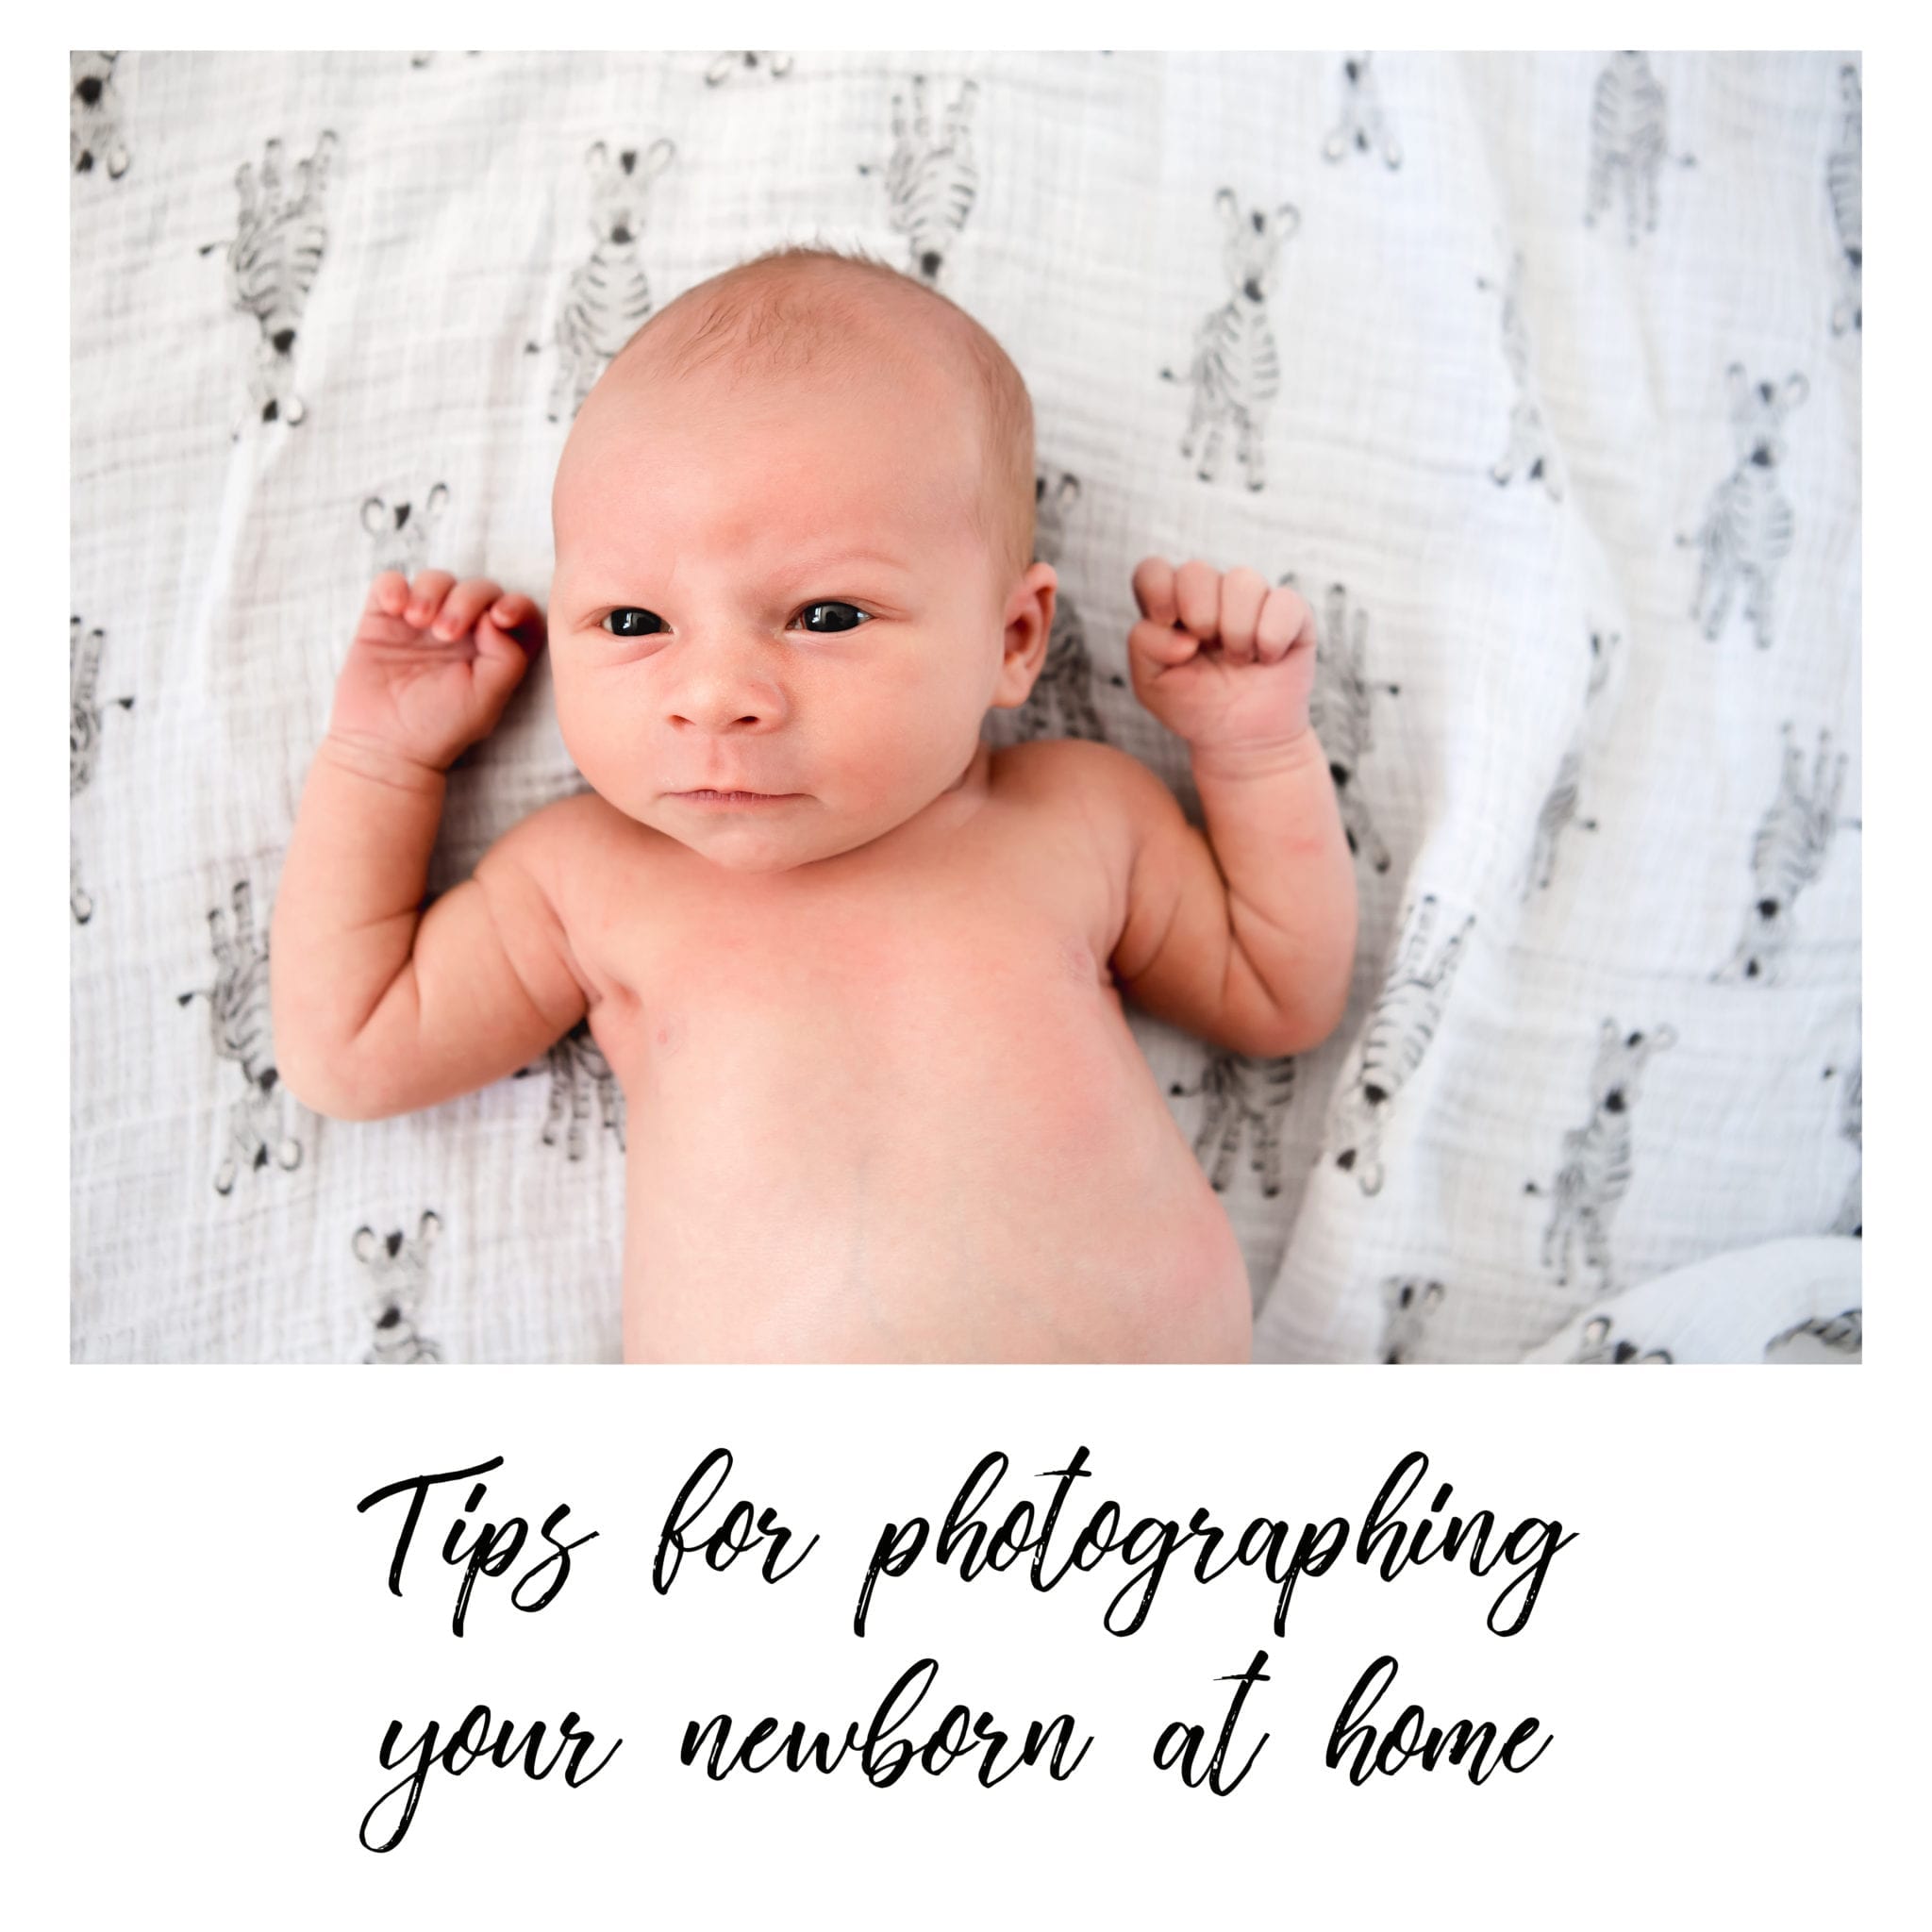 Photographing your newborn at home